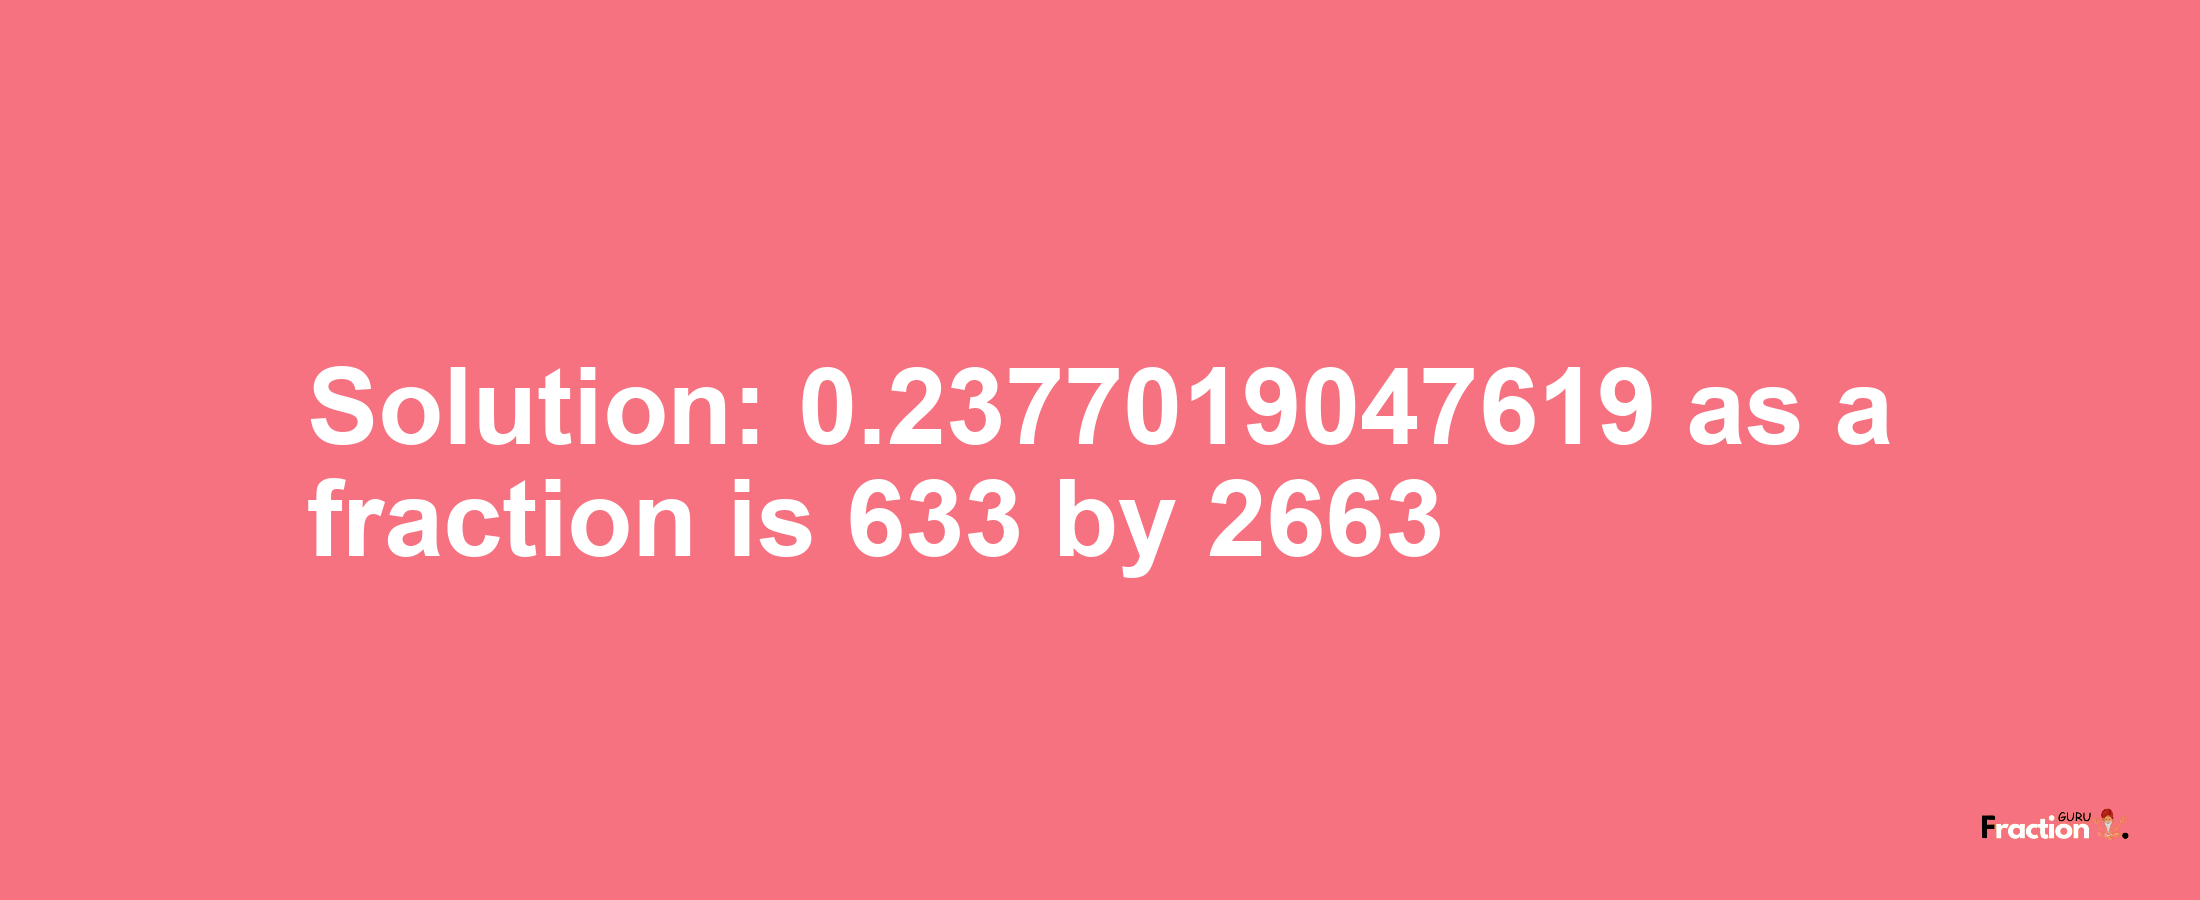 Solution:0.2377019047619 as a fraction is 633/2663